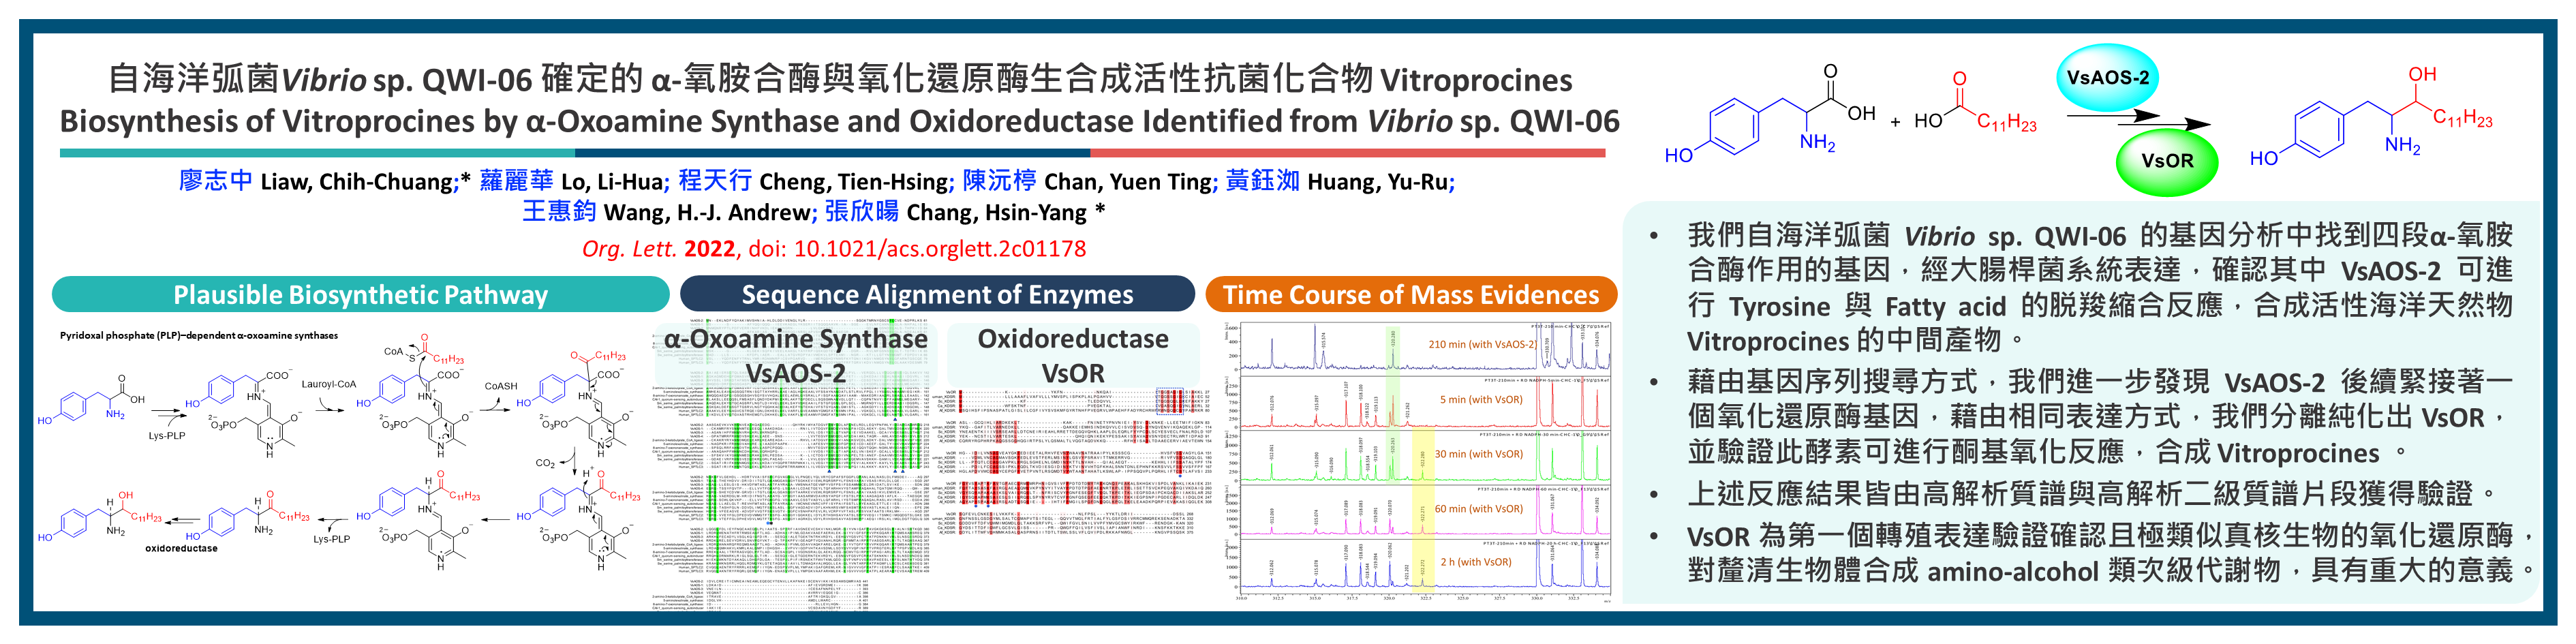 Biosynthesis of Vitroprocines by α-Oxoamine Synthase and Oxidoreductase Identified from Vibrio sp. QWI-06